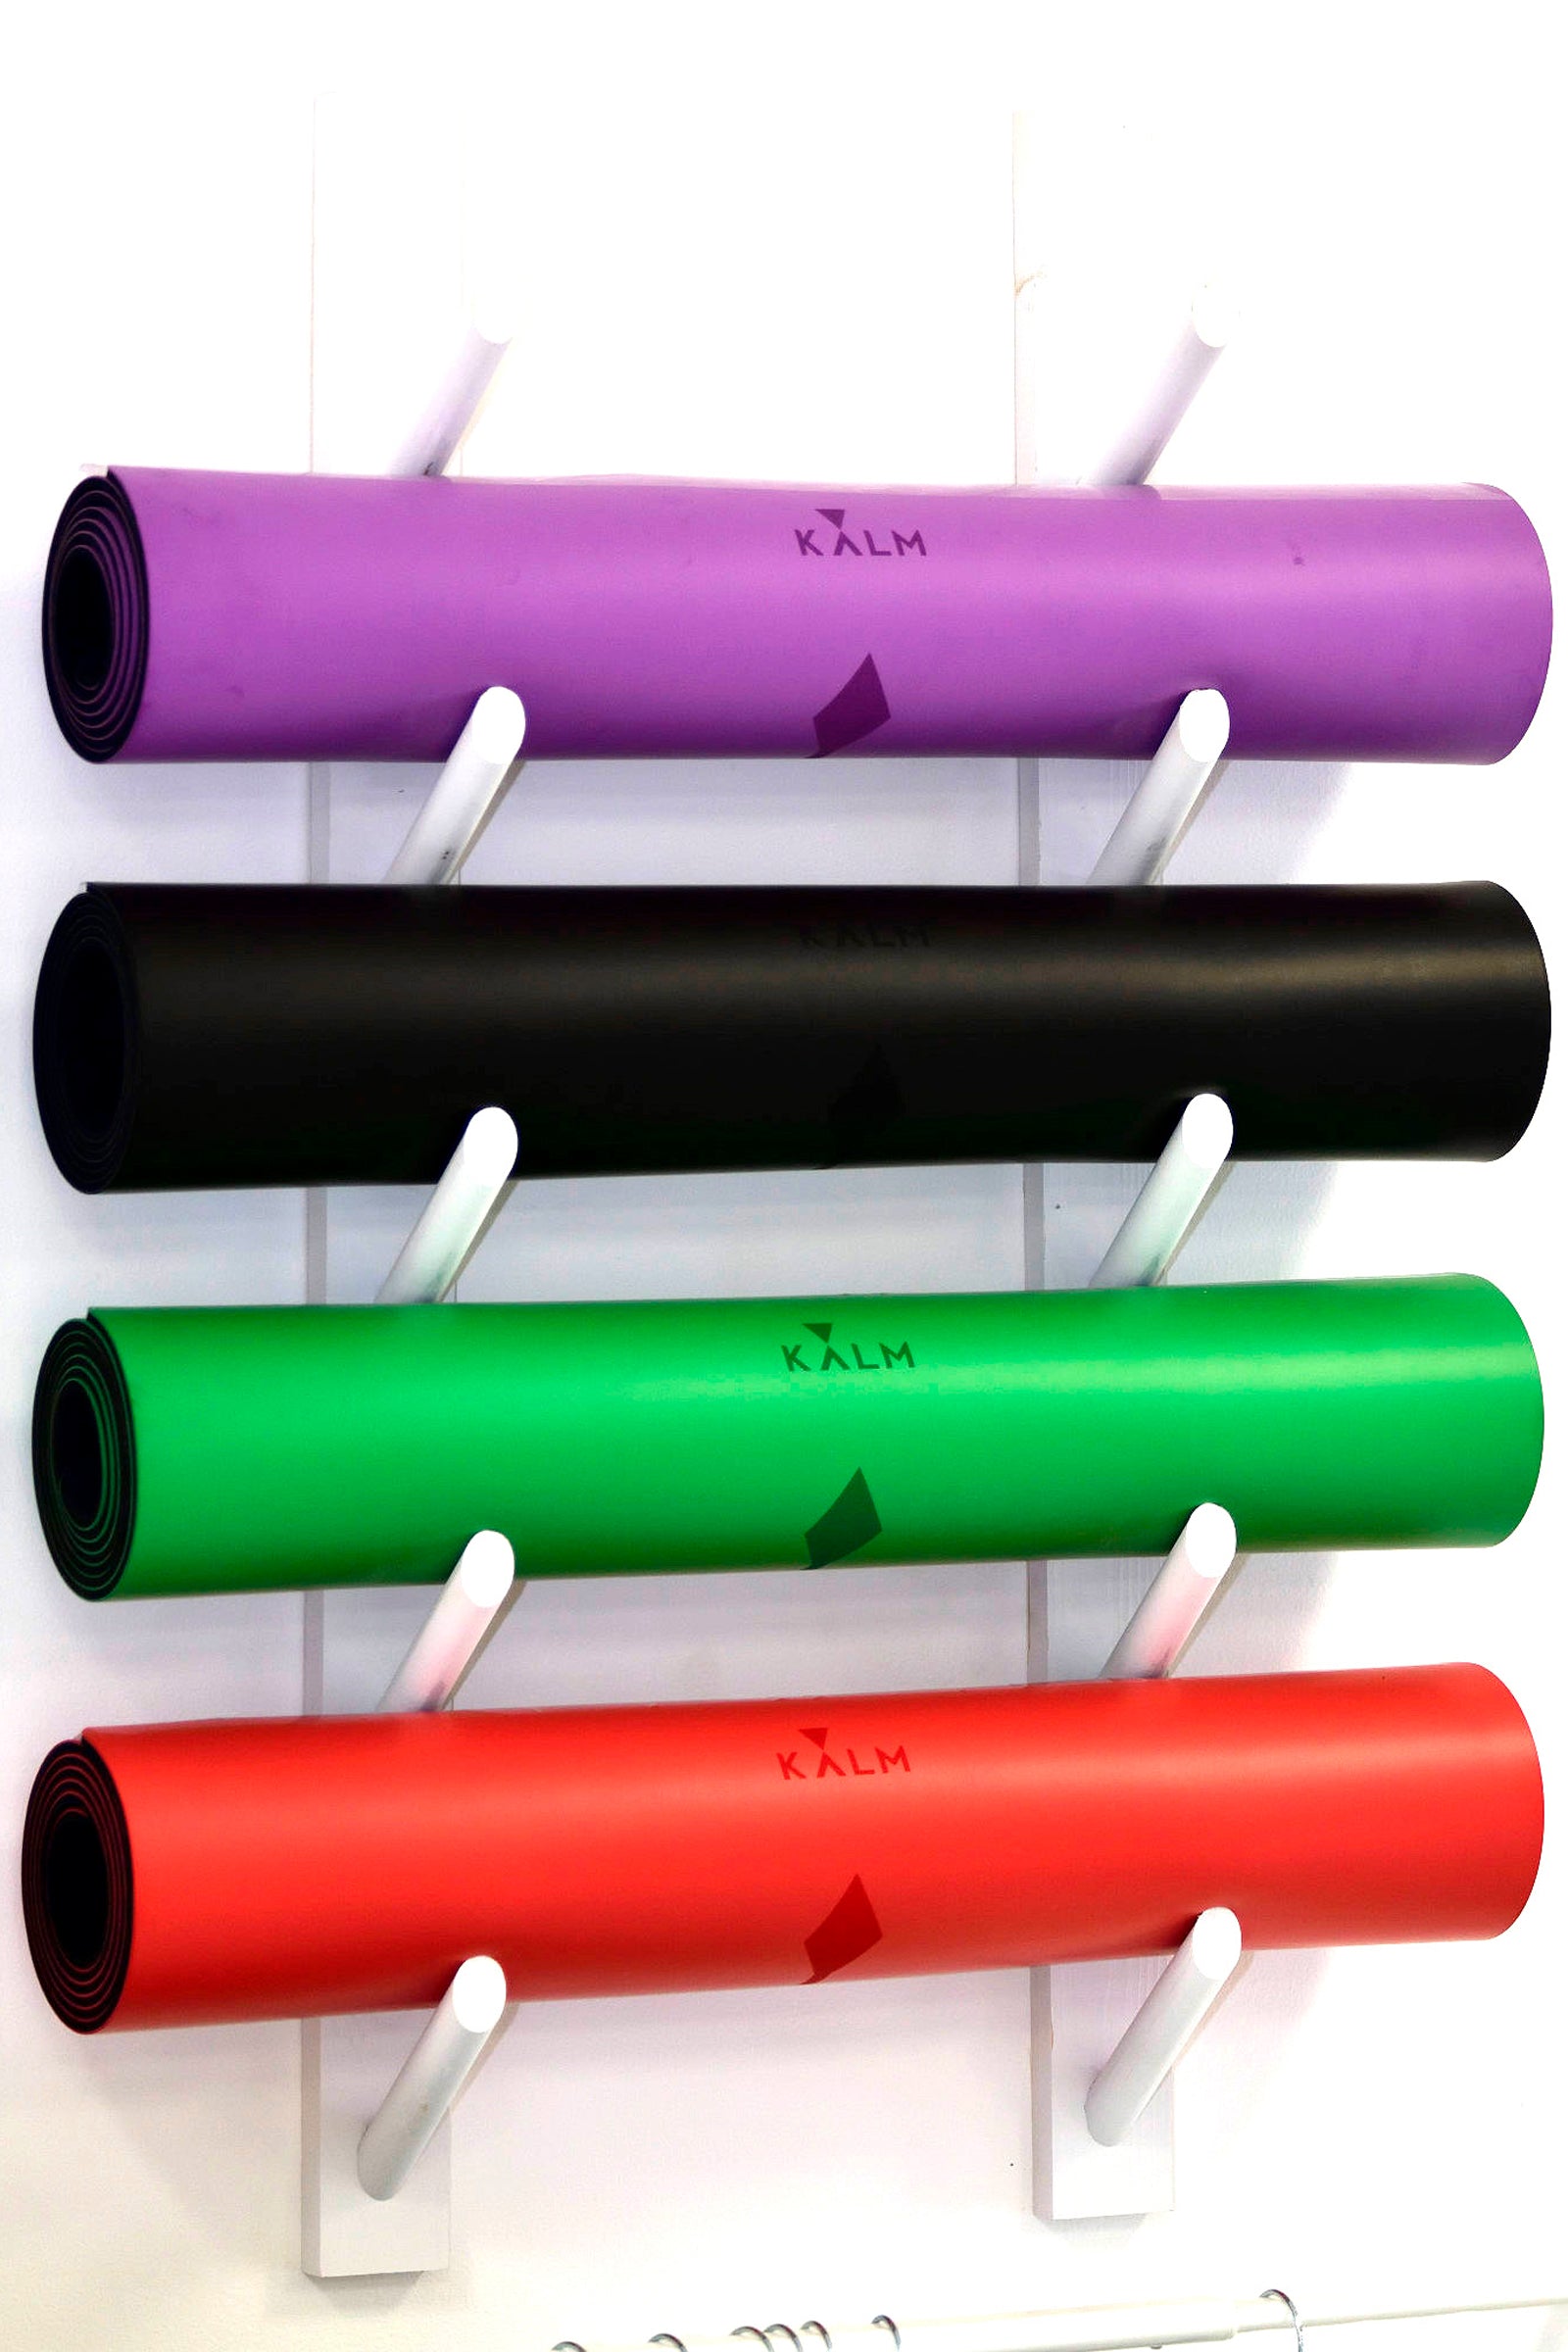 KALM Manifest Yoga Mat Eco-Friendly made with Natural Rubber for Best Grip and Excellent Support. GREEN Heal.